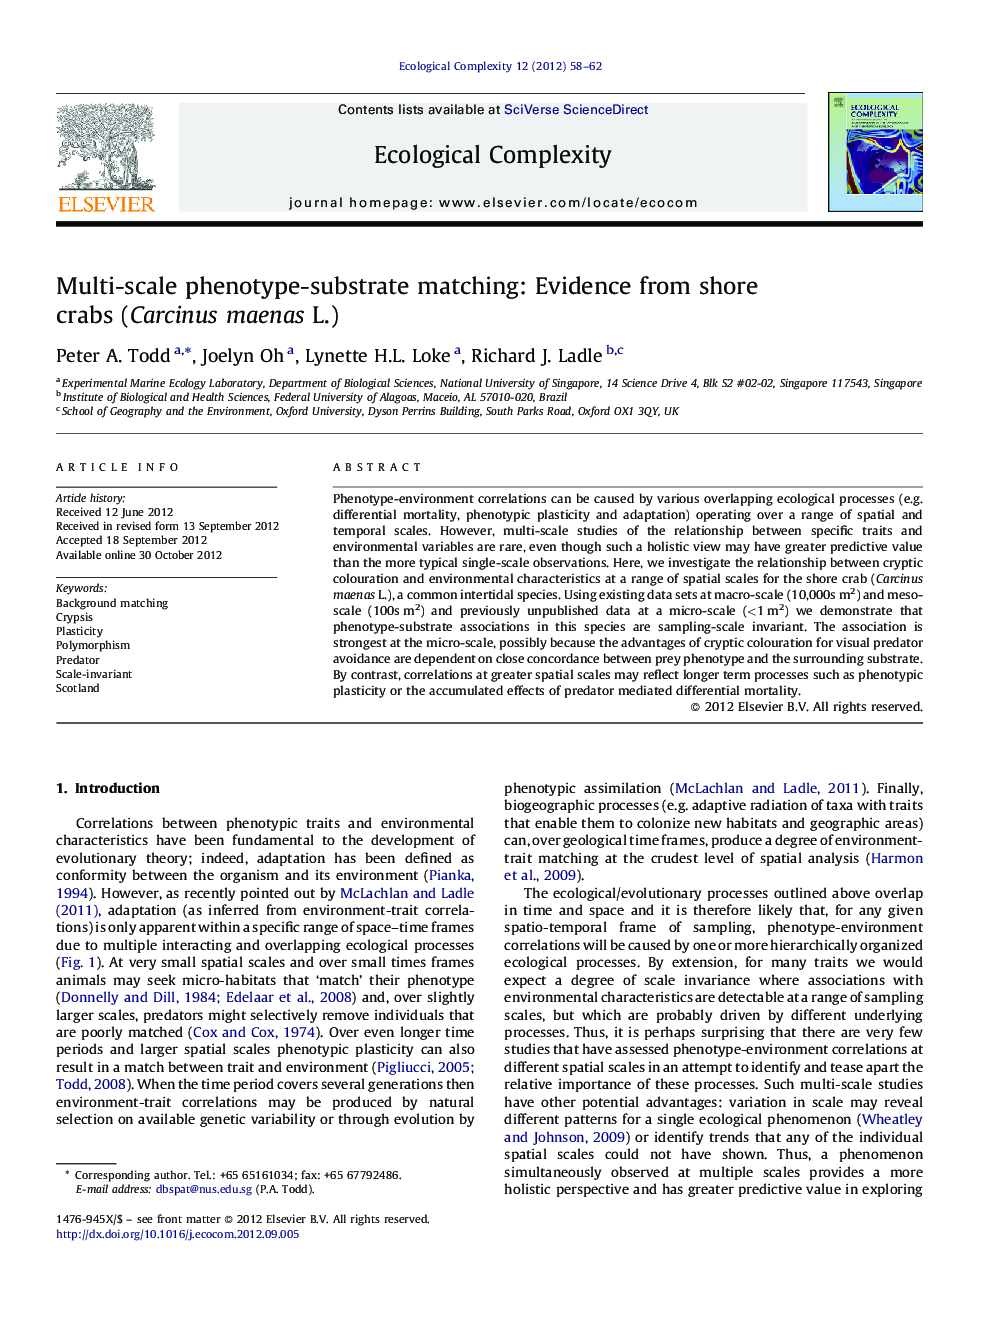 Multi-scale phenotype-substrate matching: Evidence from shore crabs (Carcinus maenas L.)